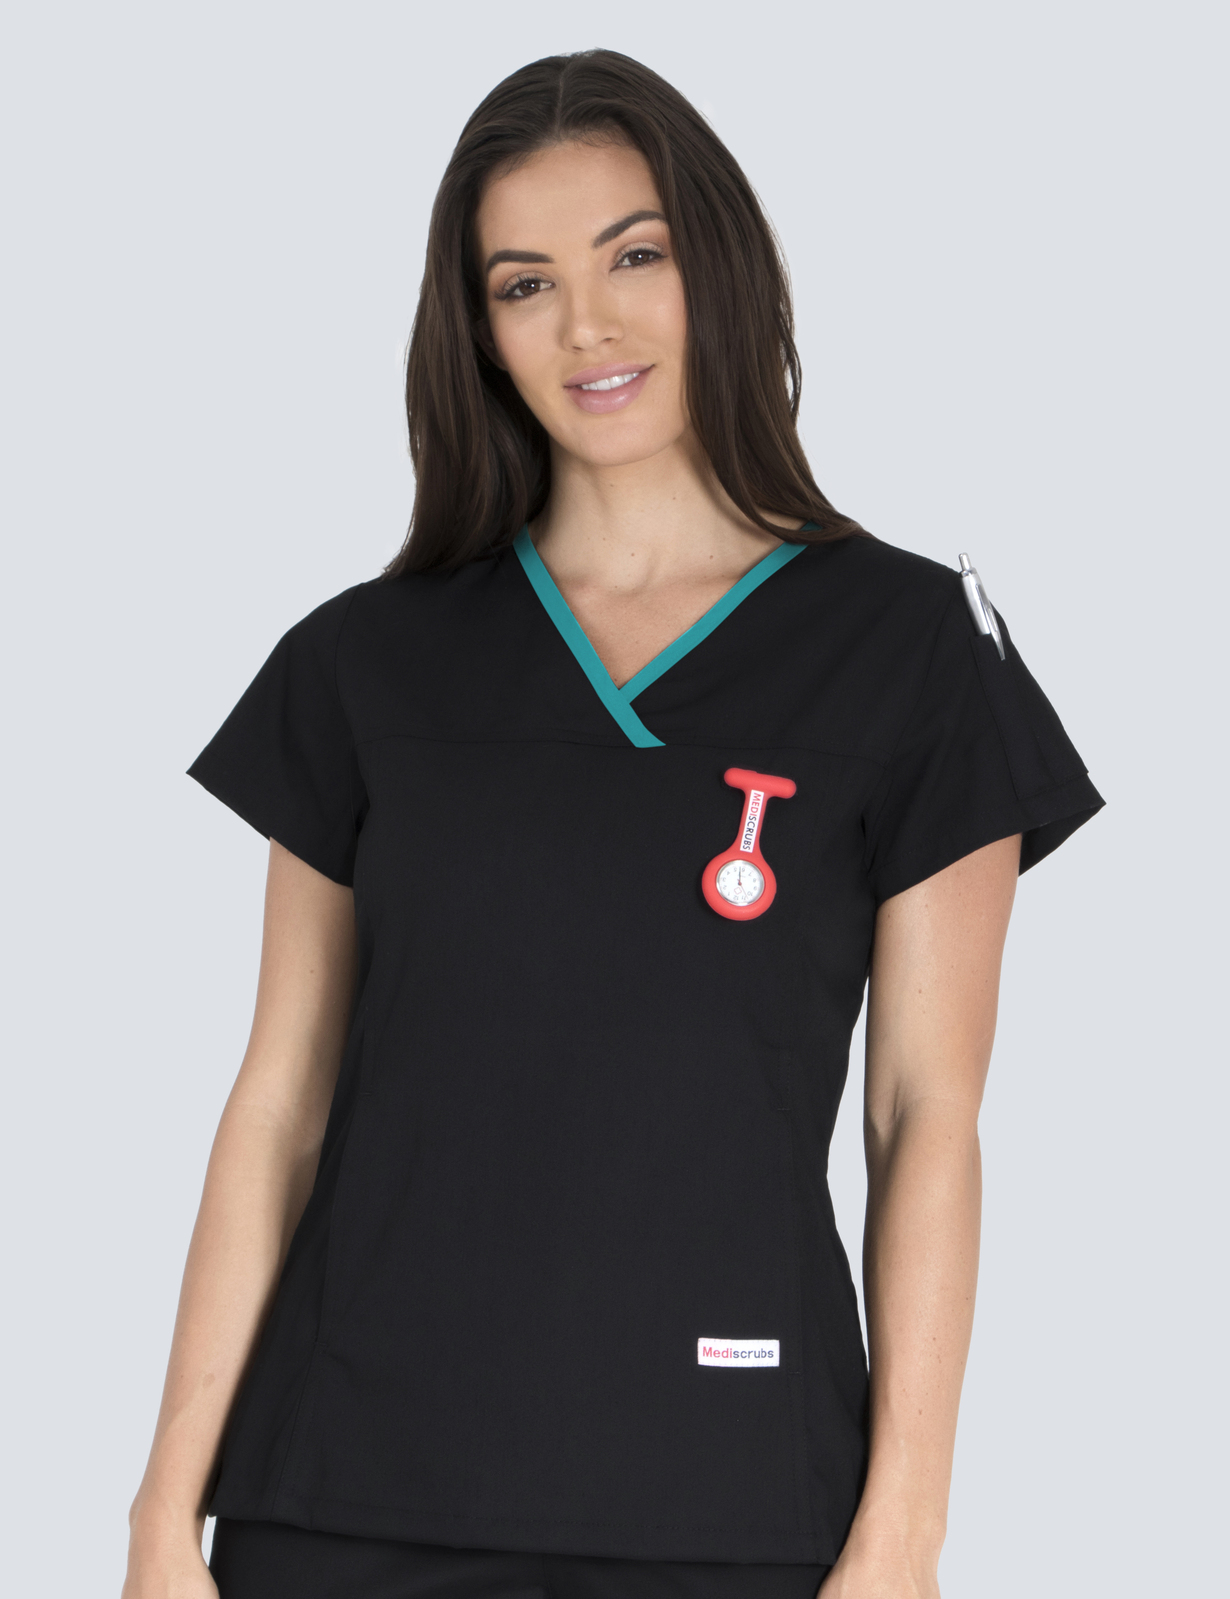 Caboolture Hospital - ICU RN (Women's Fit Solid in Black with Teal Trim incl Logos)